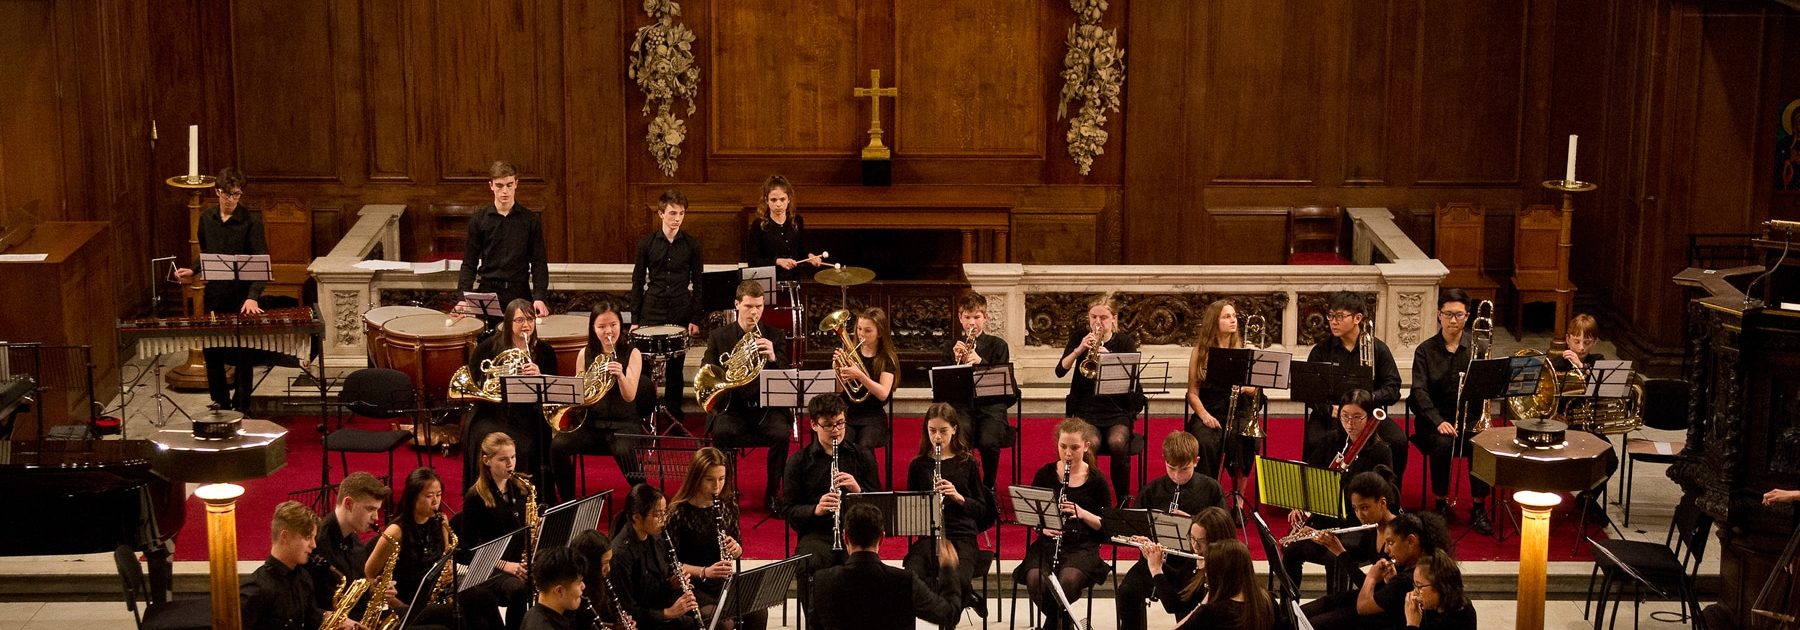 St James’s Piccadilly, London , annual concert CANCELLED